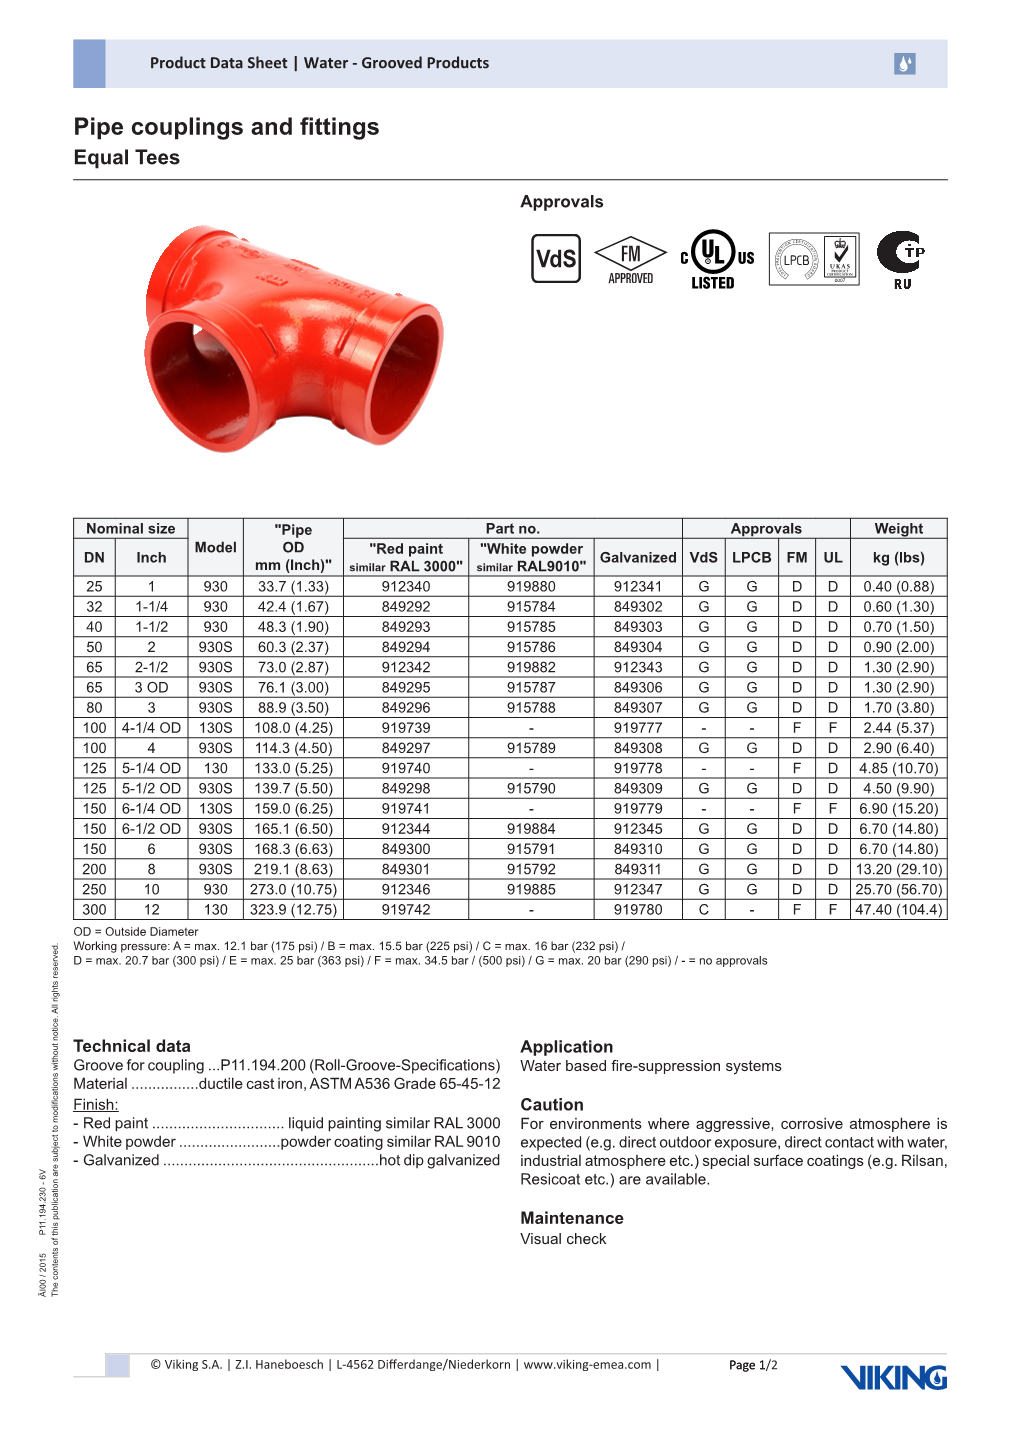 Pipe Couplings and Fittings